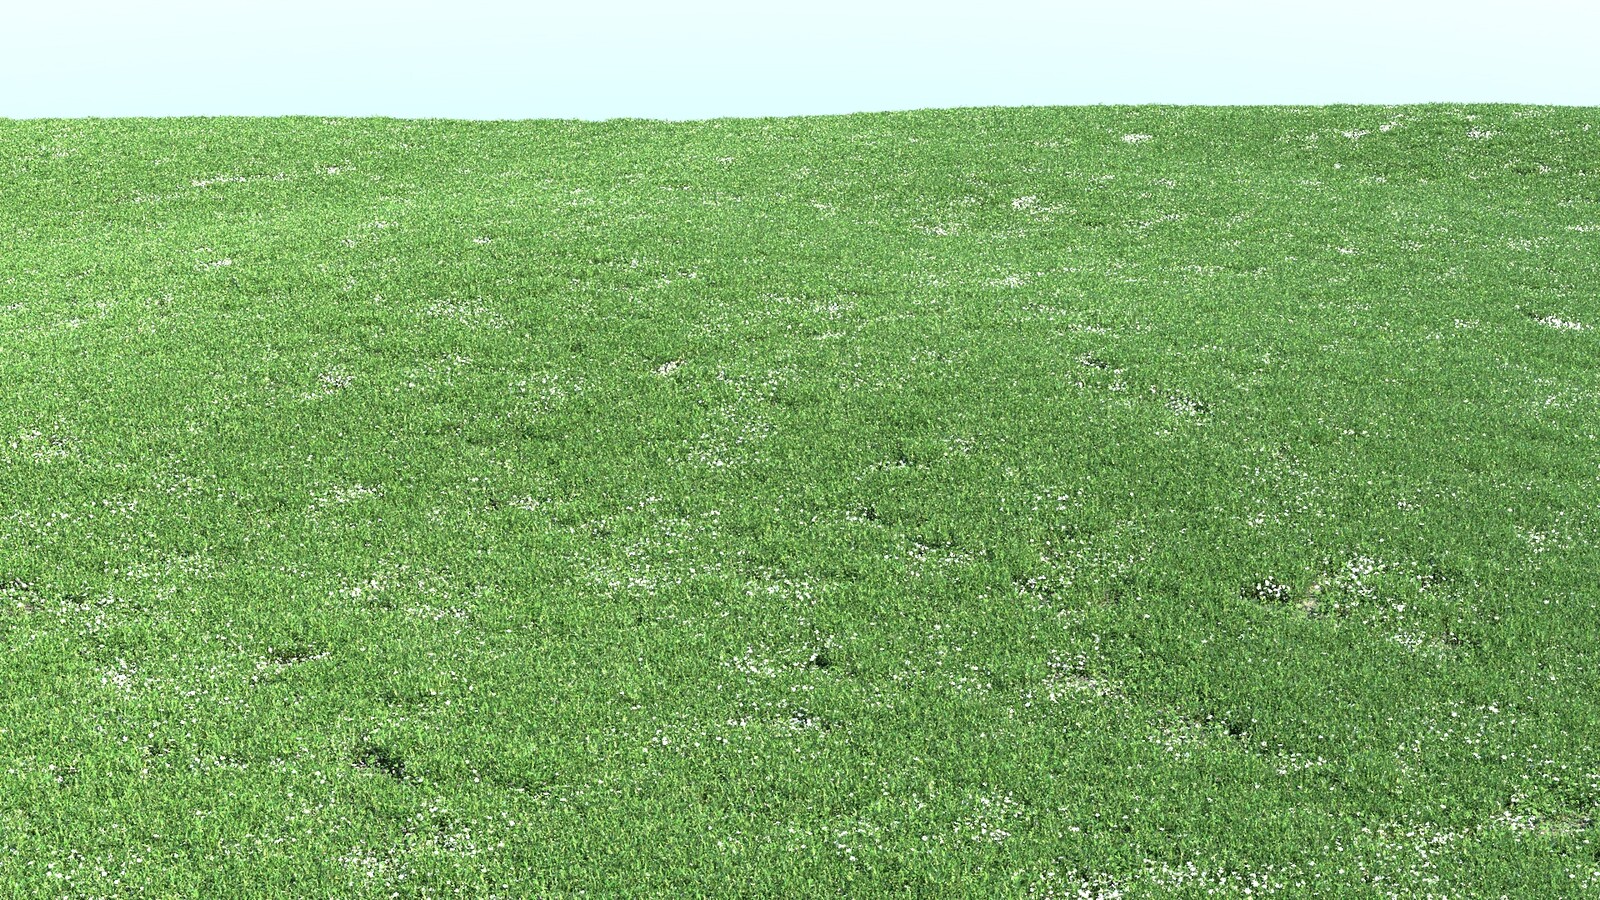 Old work - material dev: archi grass